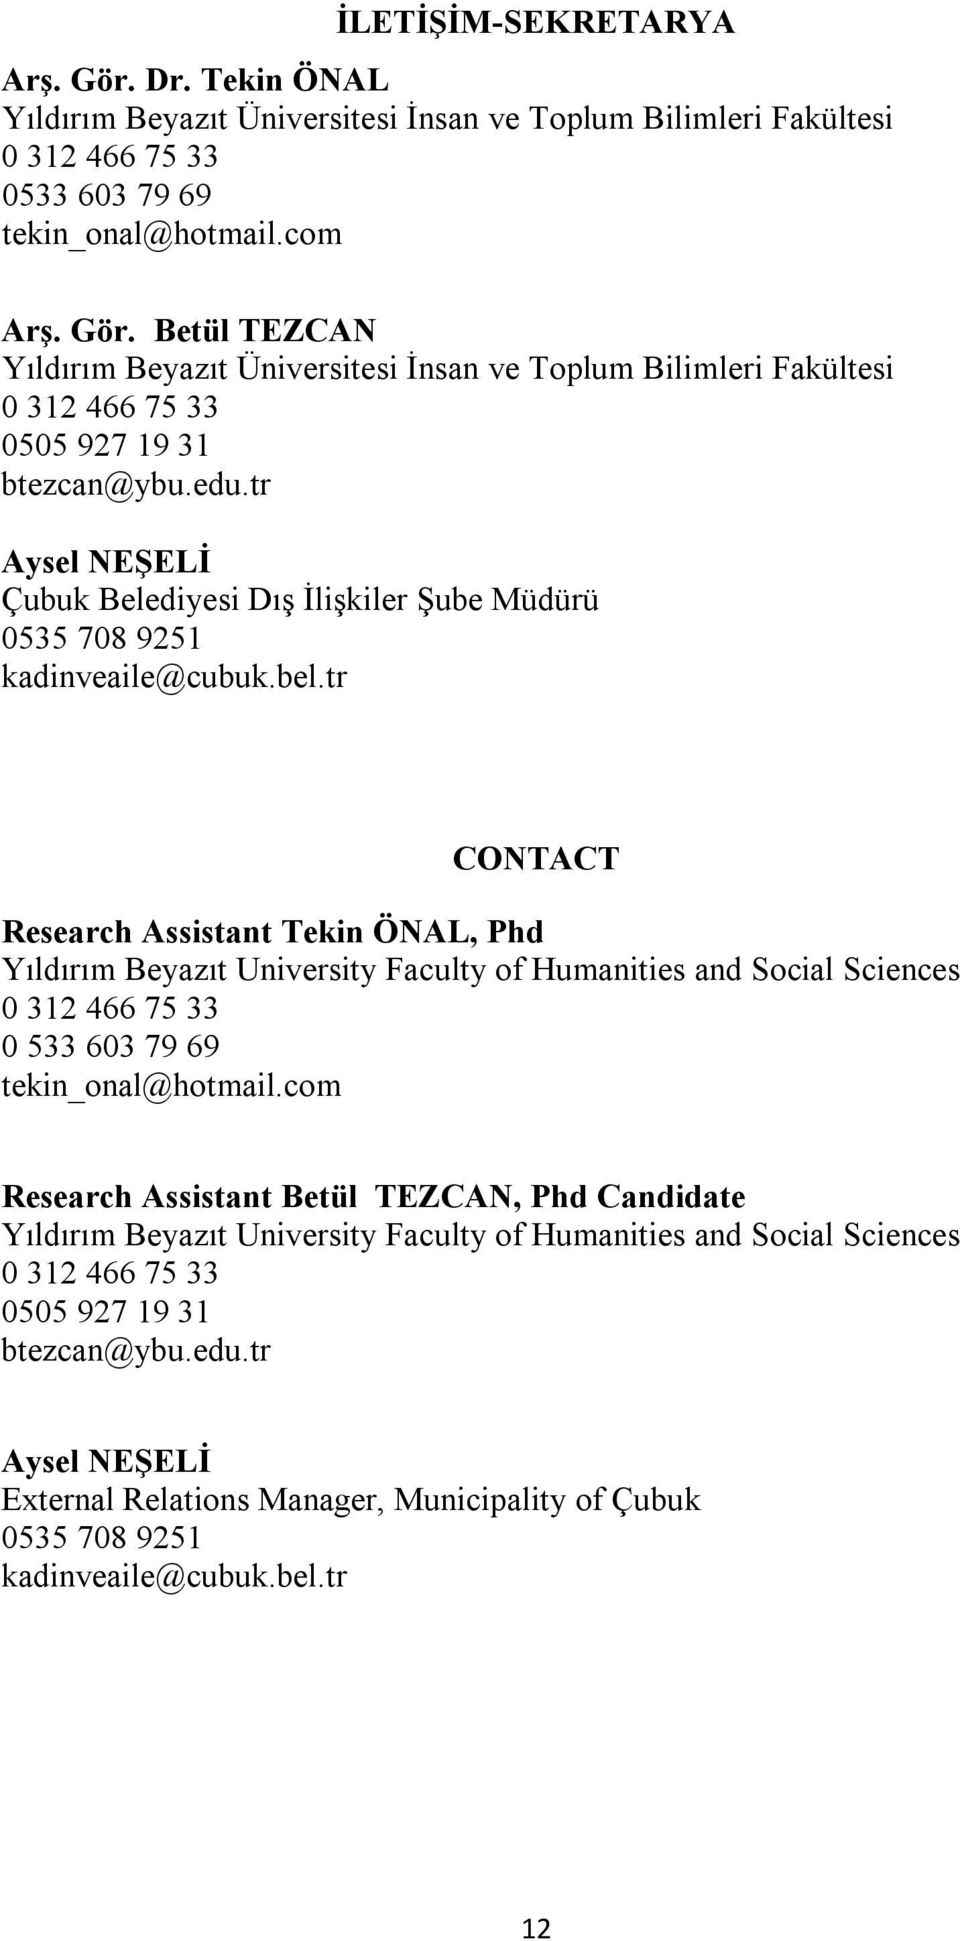 tr CONTACT Research Assistant Tekin ÖNAL, Phd Faculty of Humanities and Social Sciences 0 312 466 75 33 0 533 603 79 69 tekin_onal@hotmail.